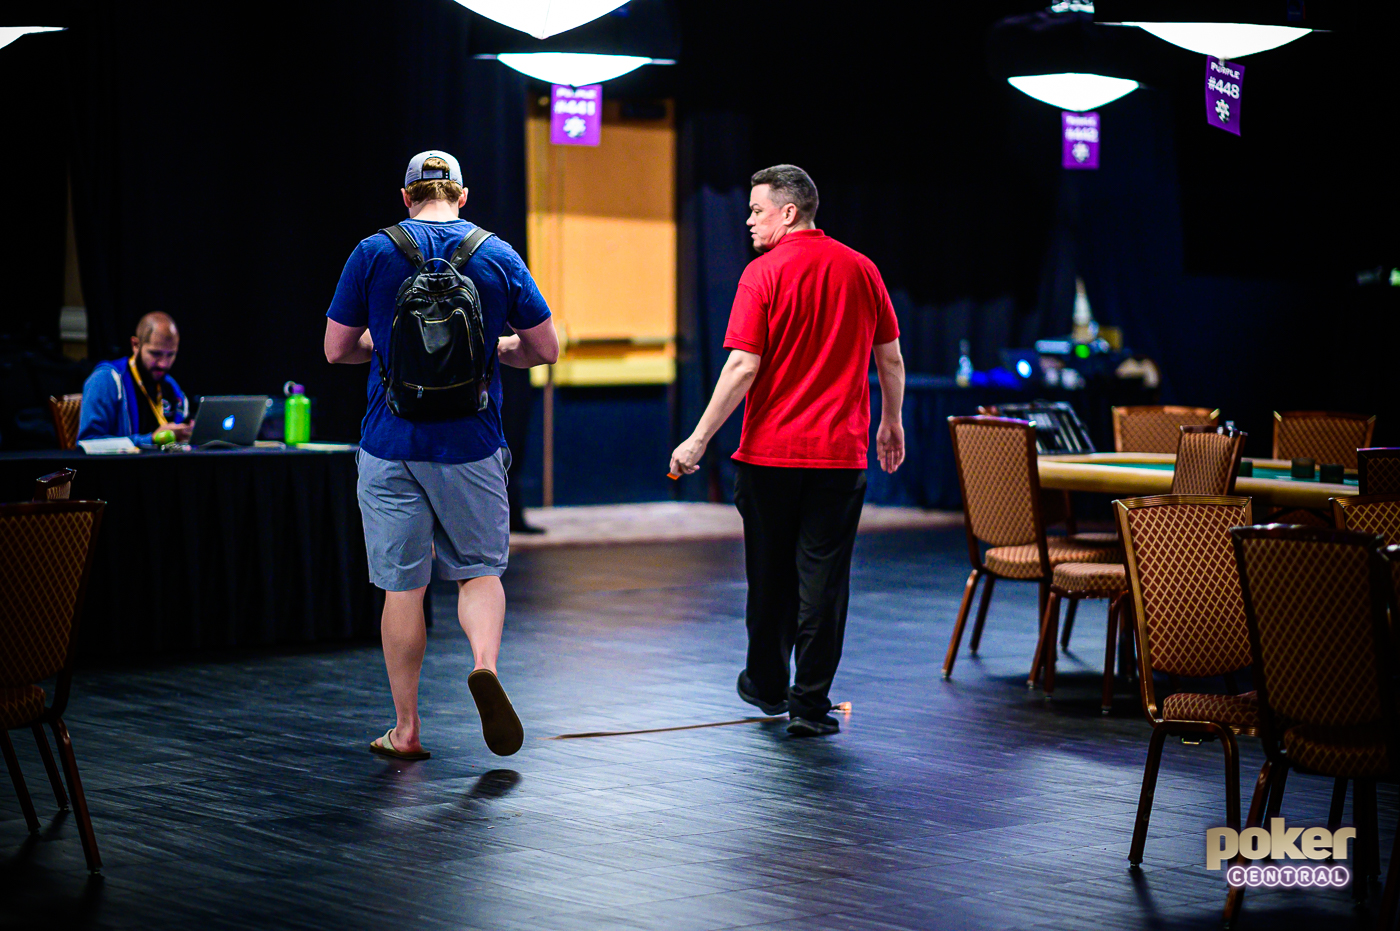 Alex Foxen on his way to the payout desk after busting the 2019 WSOP Main Event in 40th place.